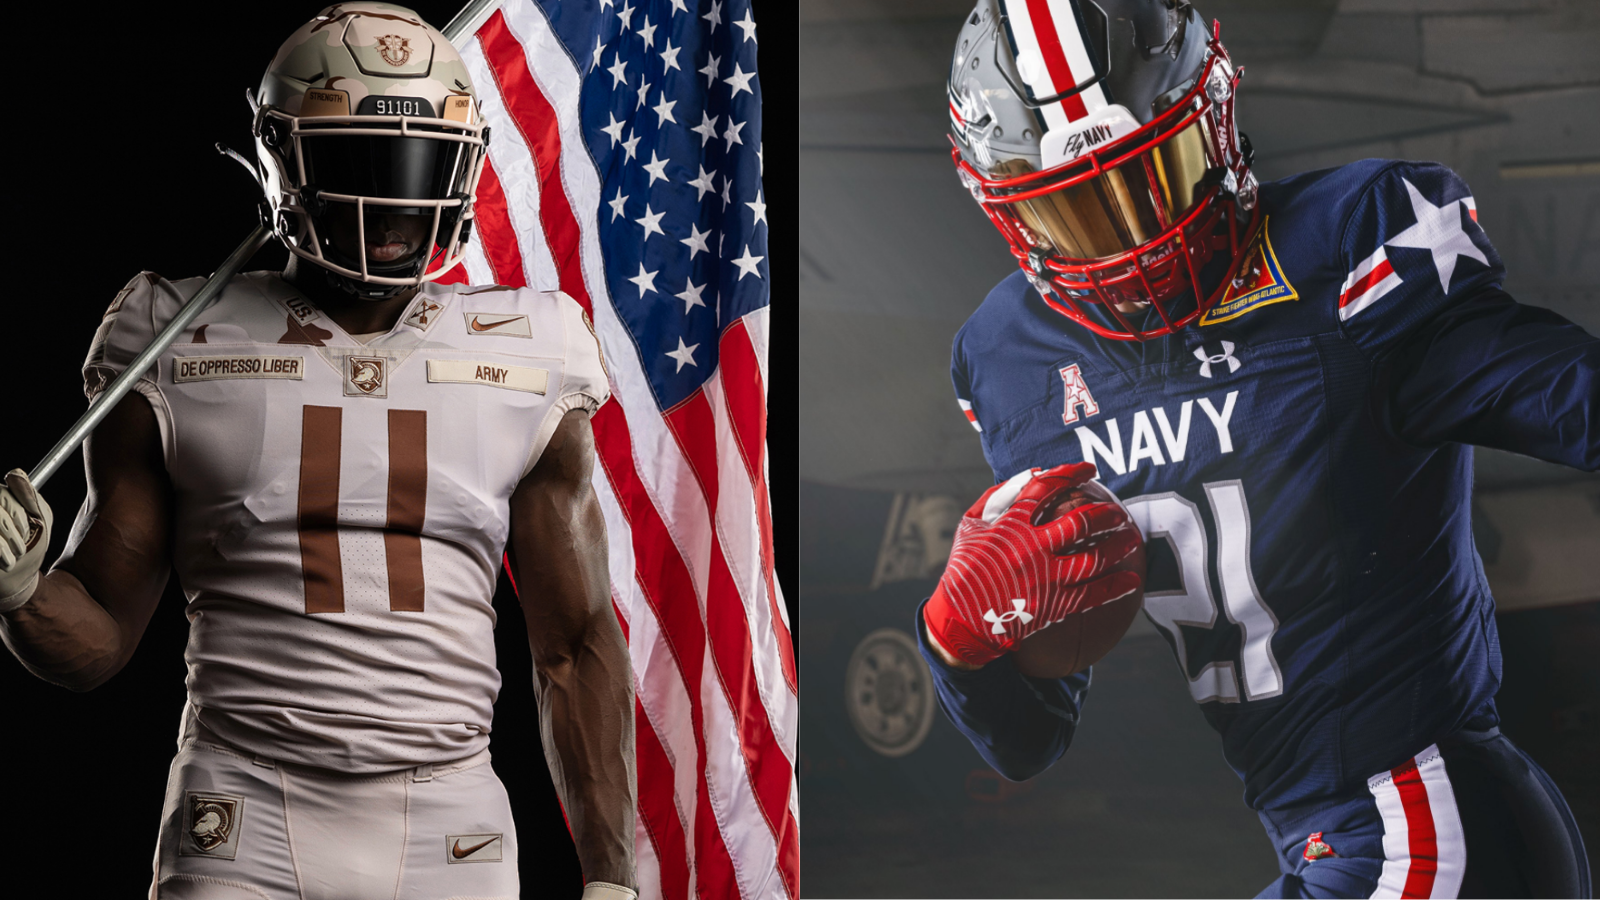 Special Navy uniforms for Army-Navy game 2021